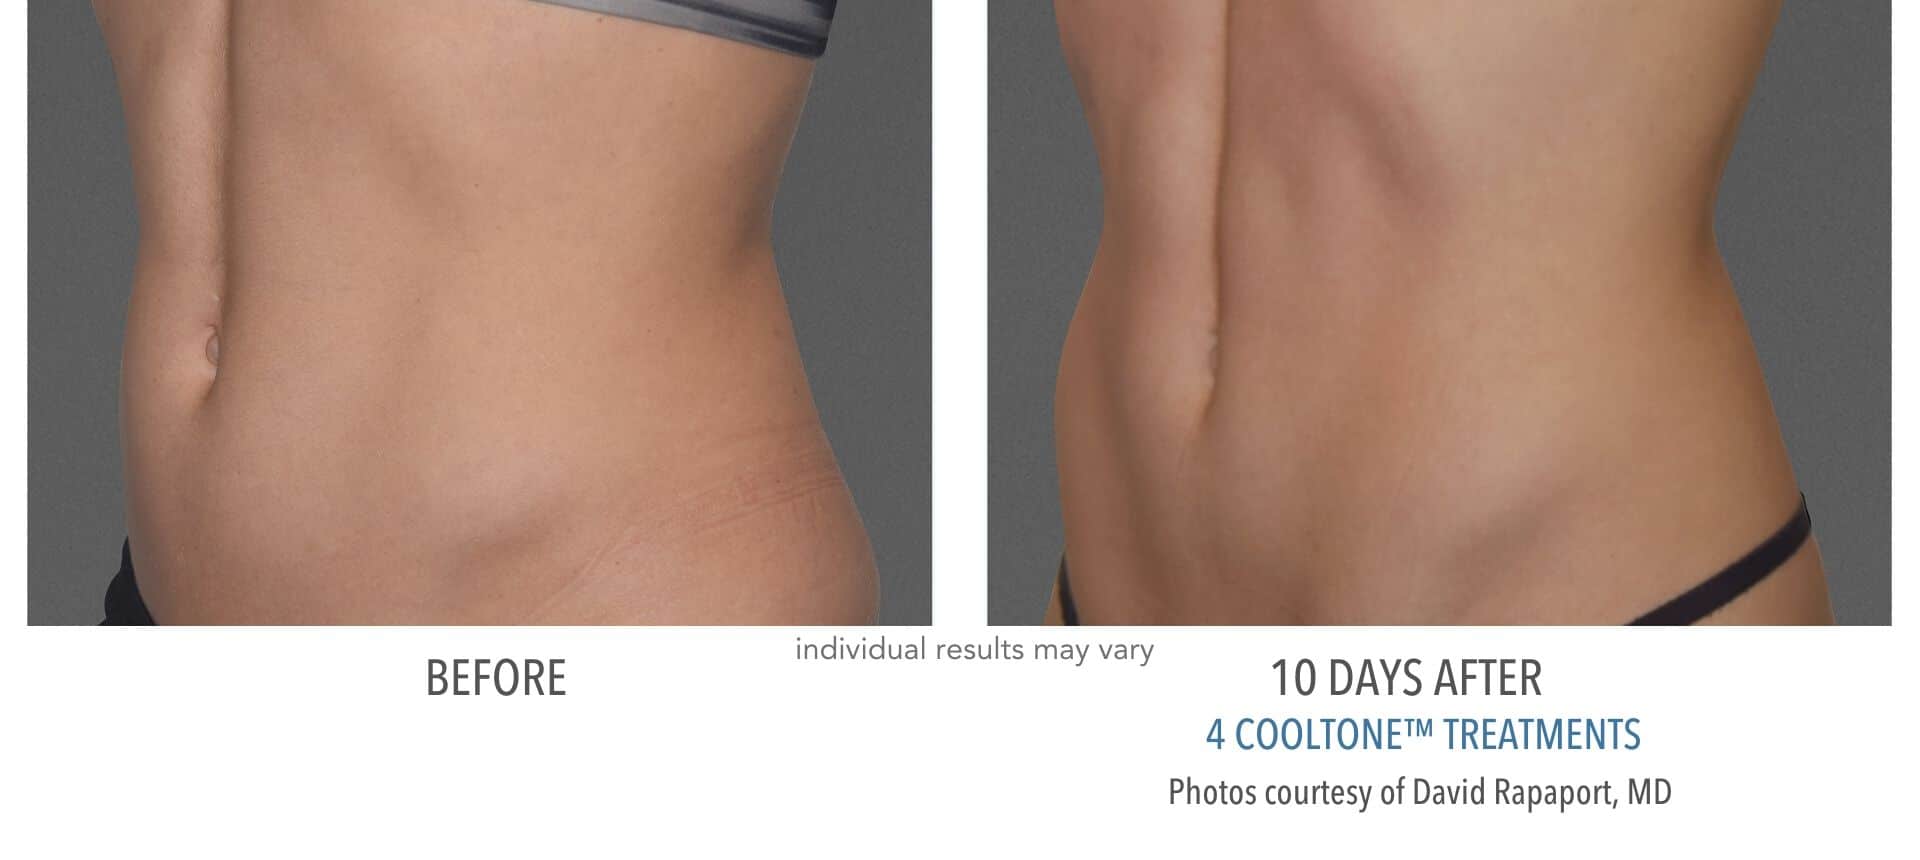 Womans abdomen before and after cooltone treatment at advanced rejuvenation centers.